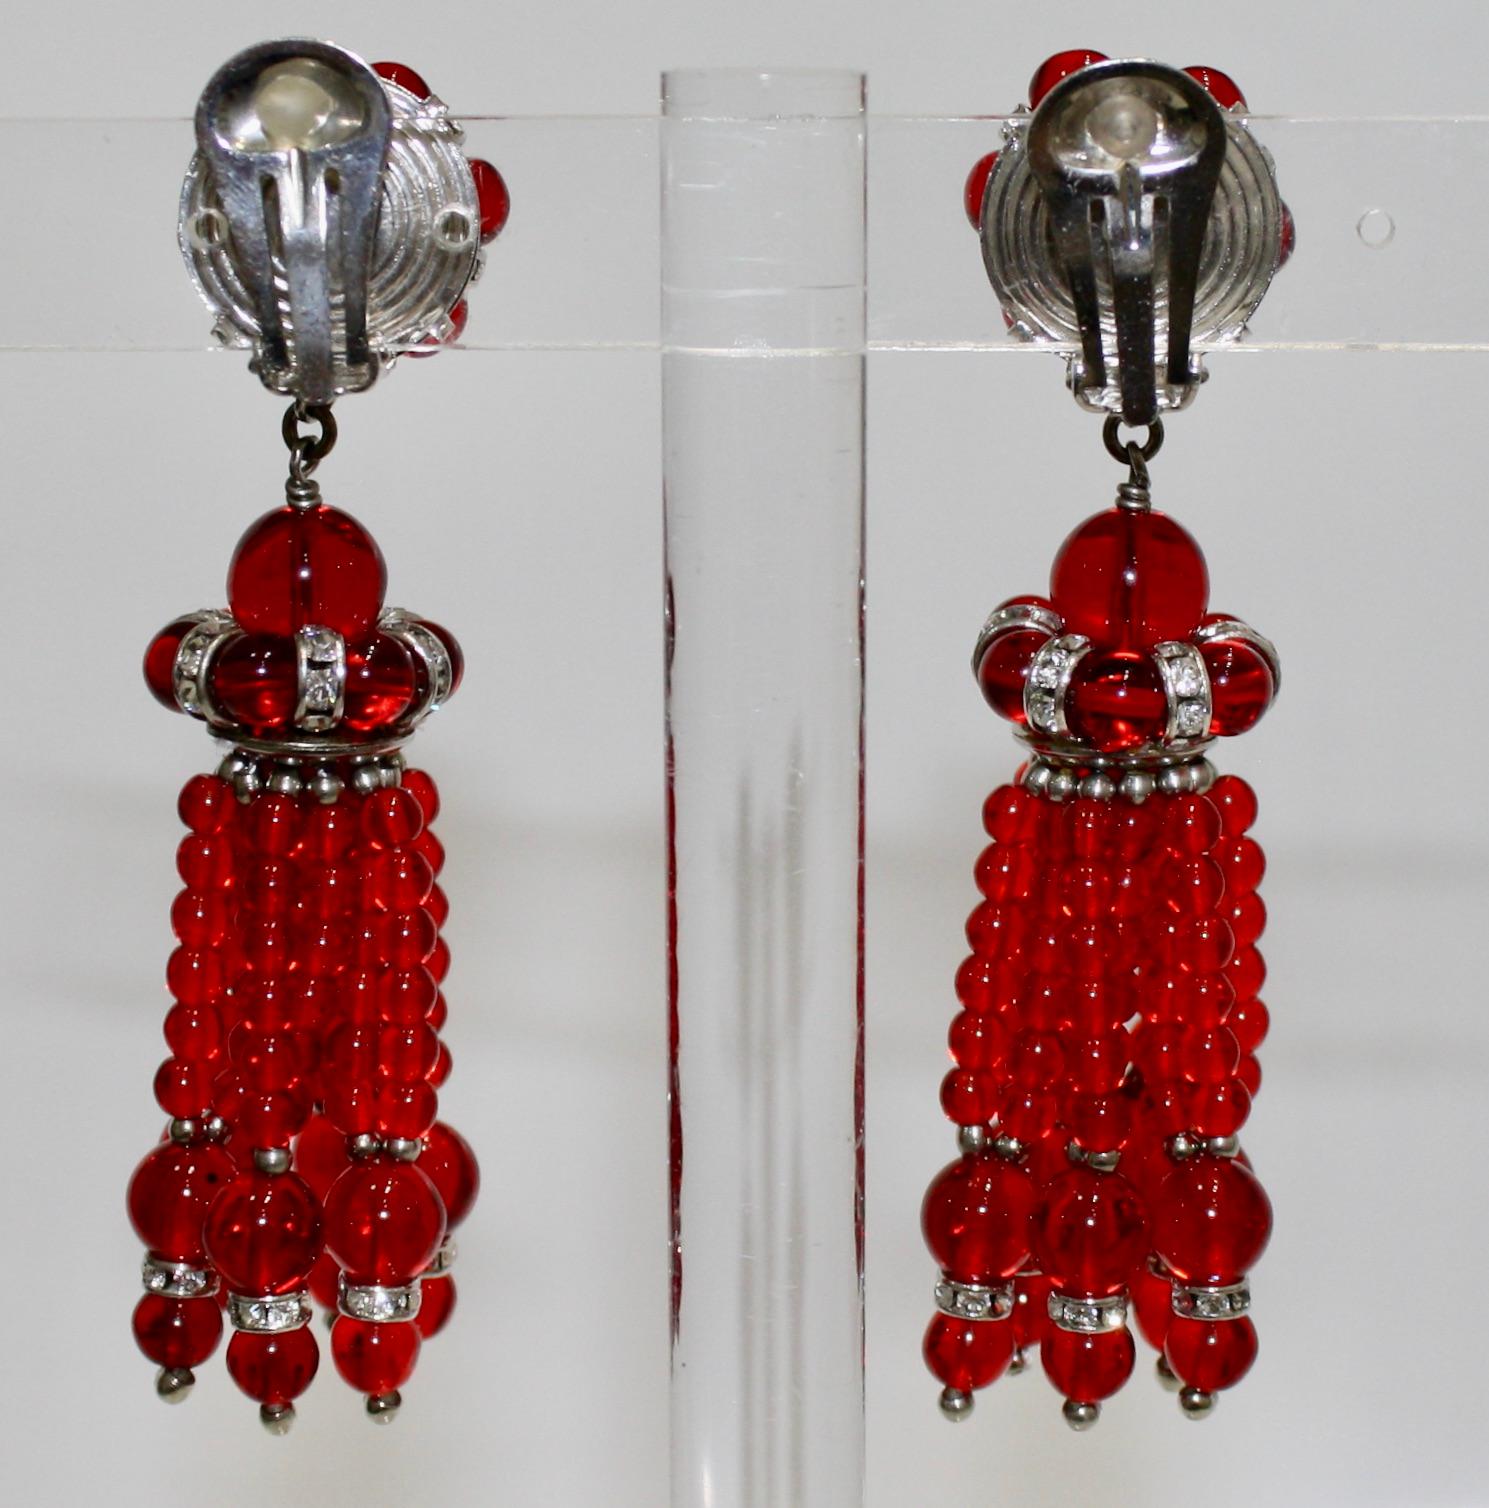 Clip earring . Handmade glass cabochons with silver finish Swarovski crystal rondelles.
A stunning statement earring.